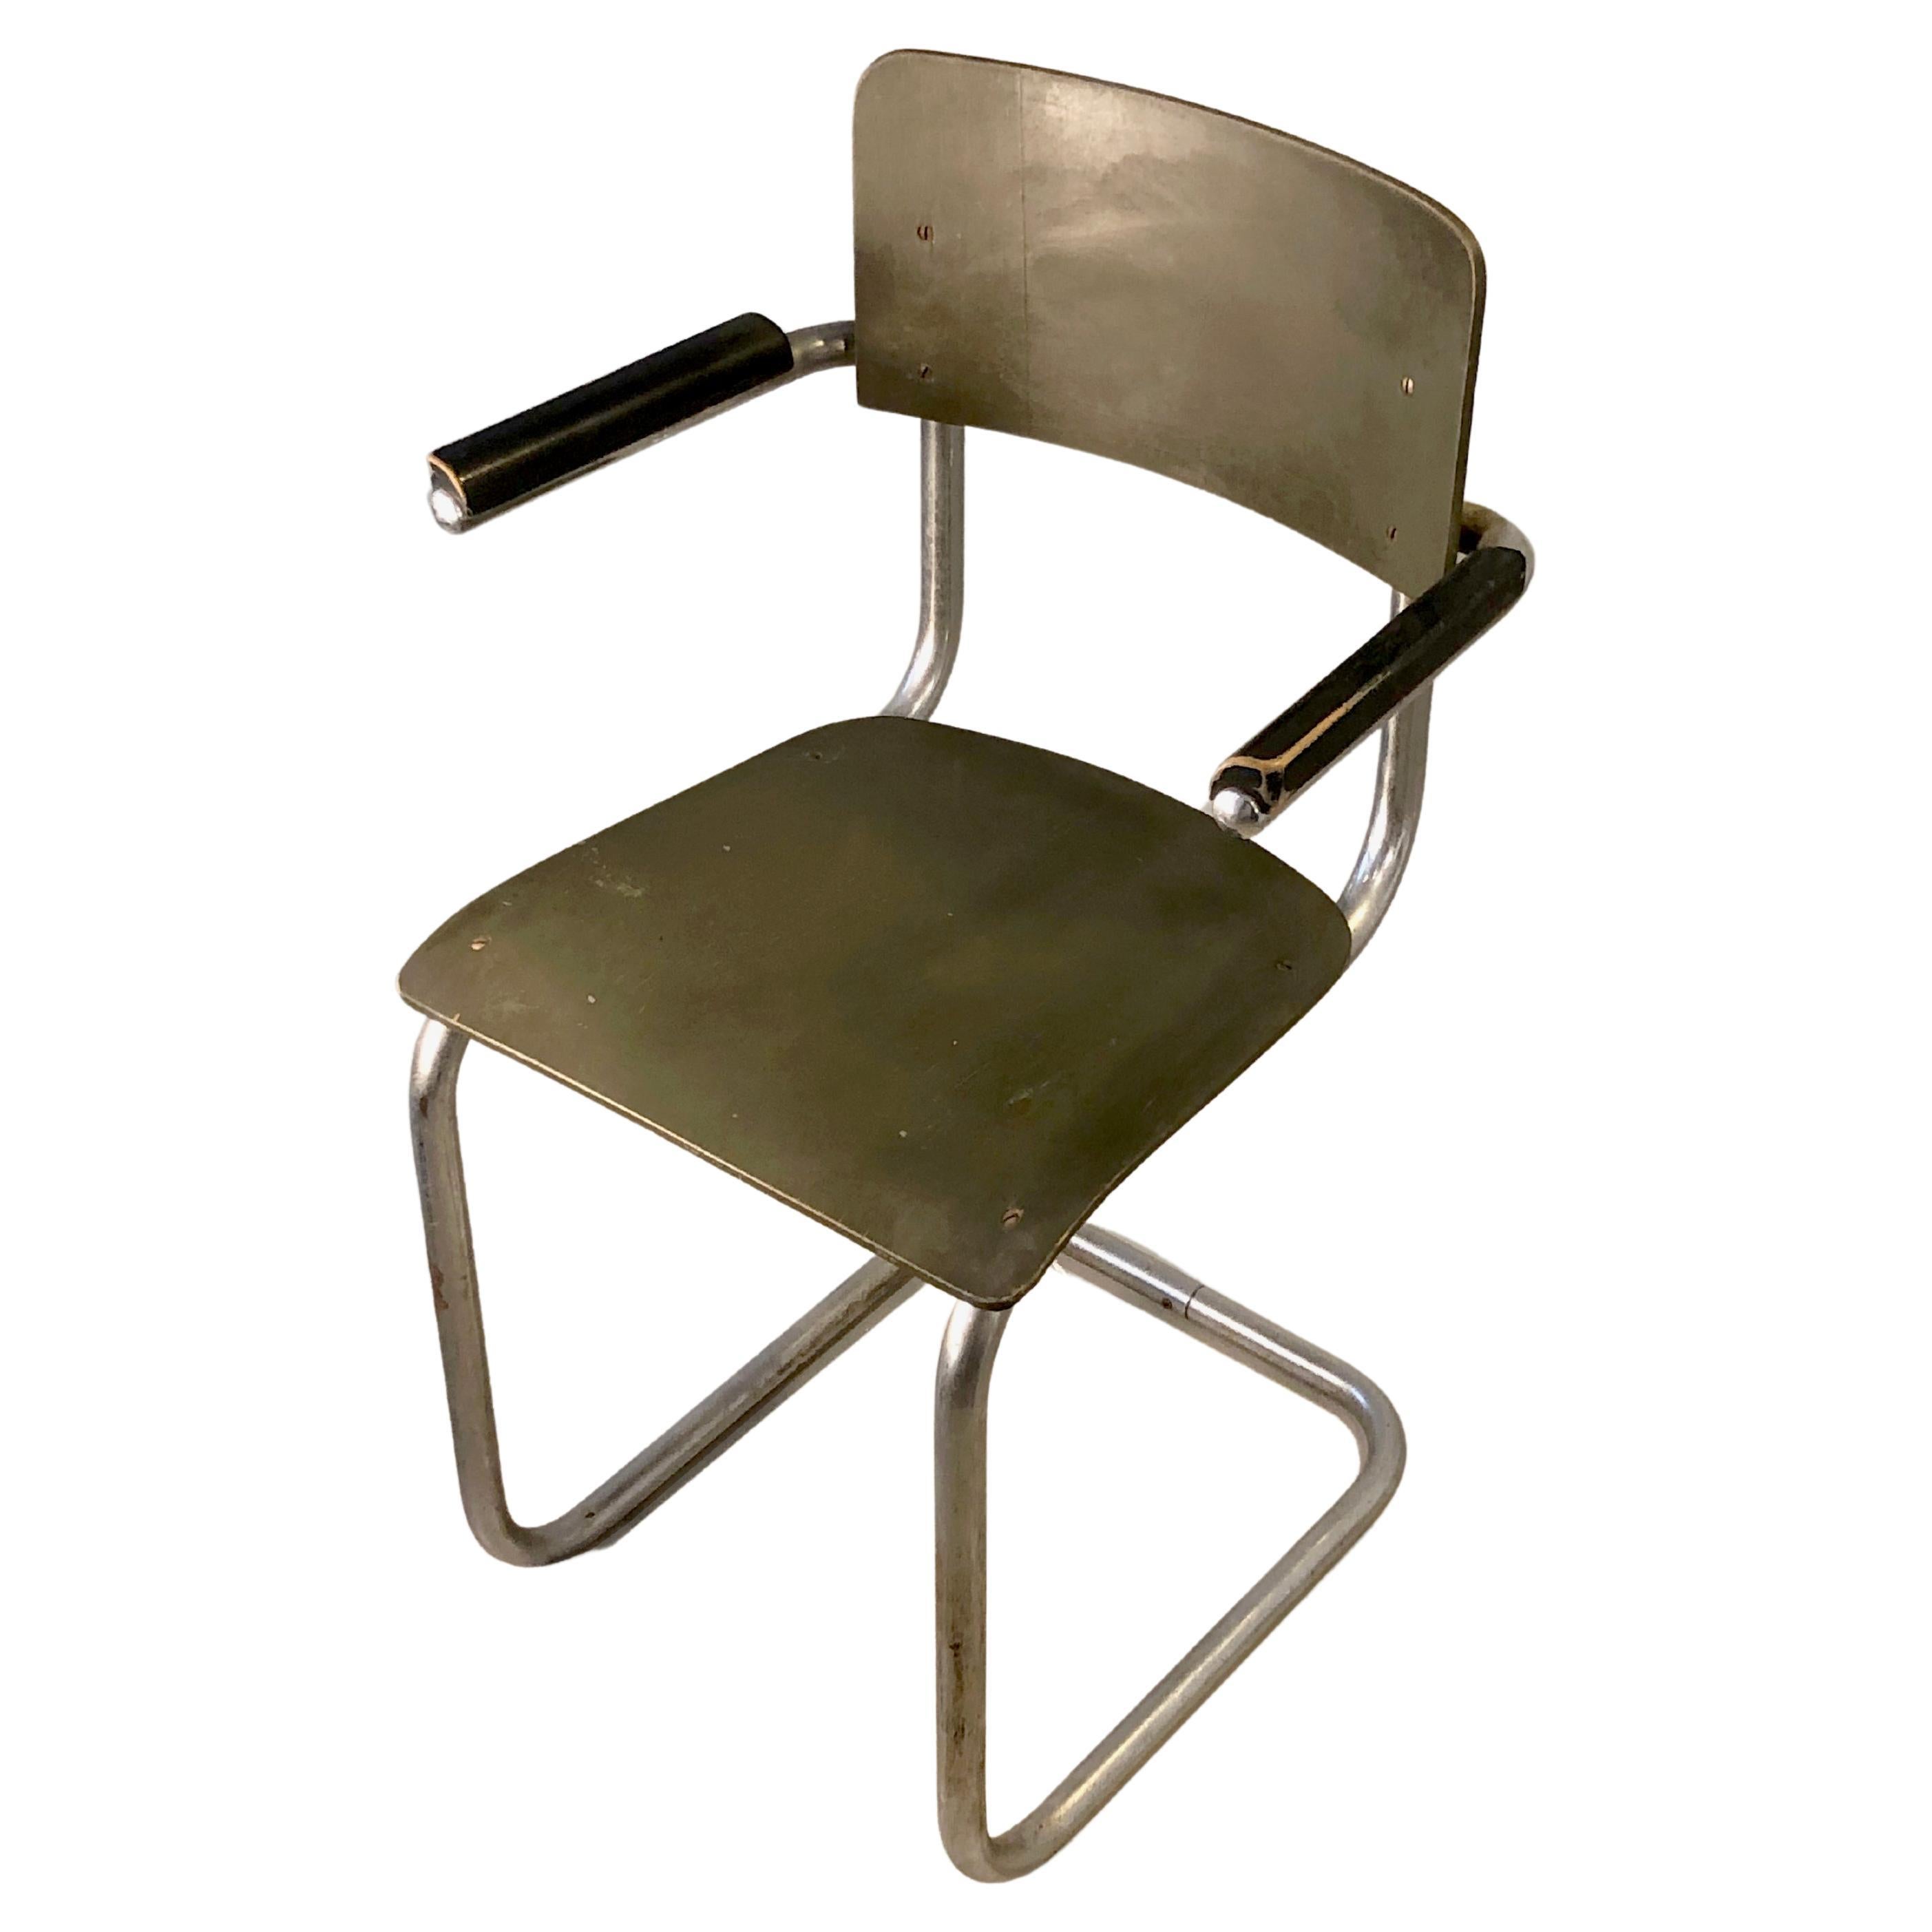 An Early MODERNIST BAUHAUS CHAIR by MART STAM for MAUSER WERKE, Germany 1930 For Sale